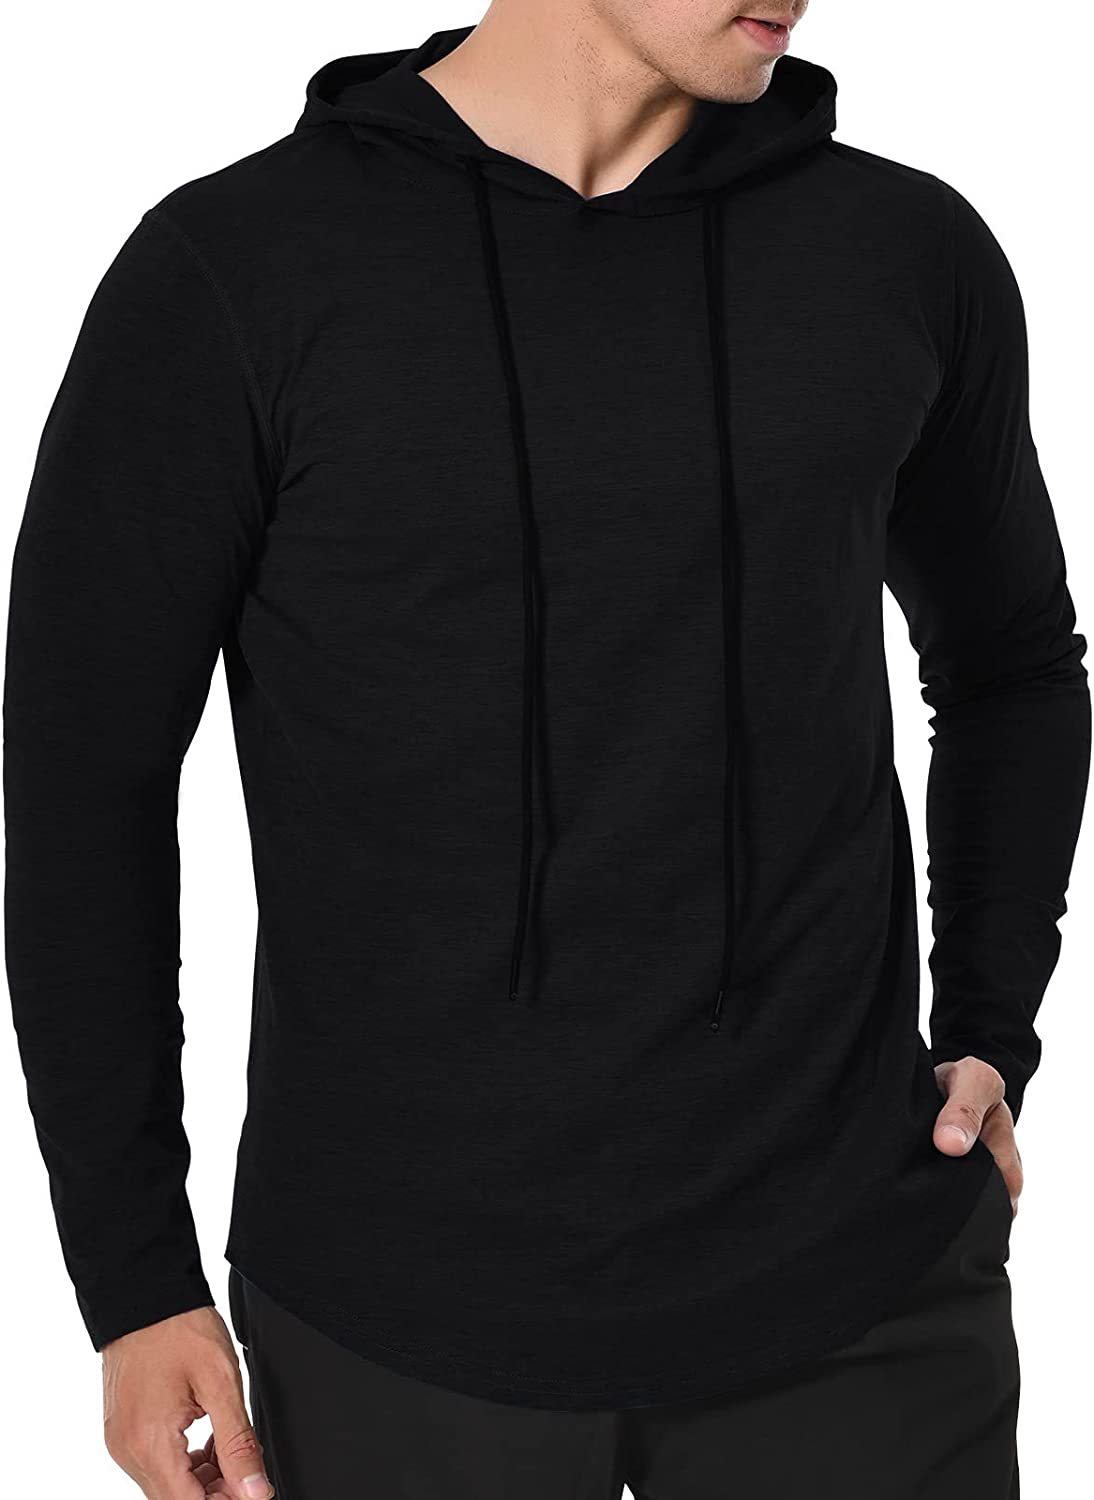 Long Sleeve Workout Hoodie Shirts for Men, Lightweight Athletic